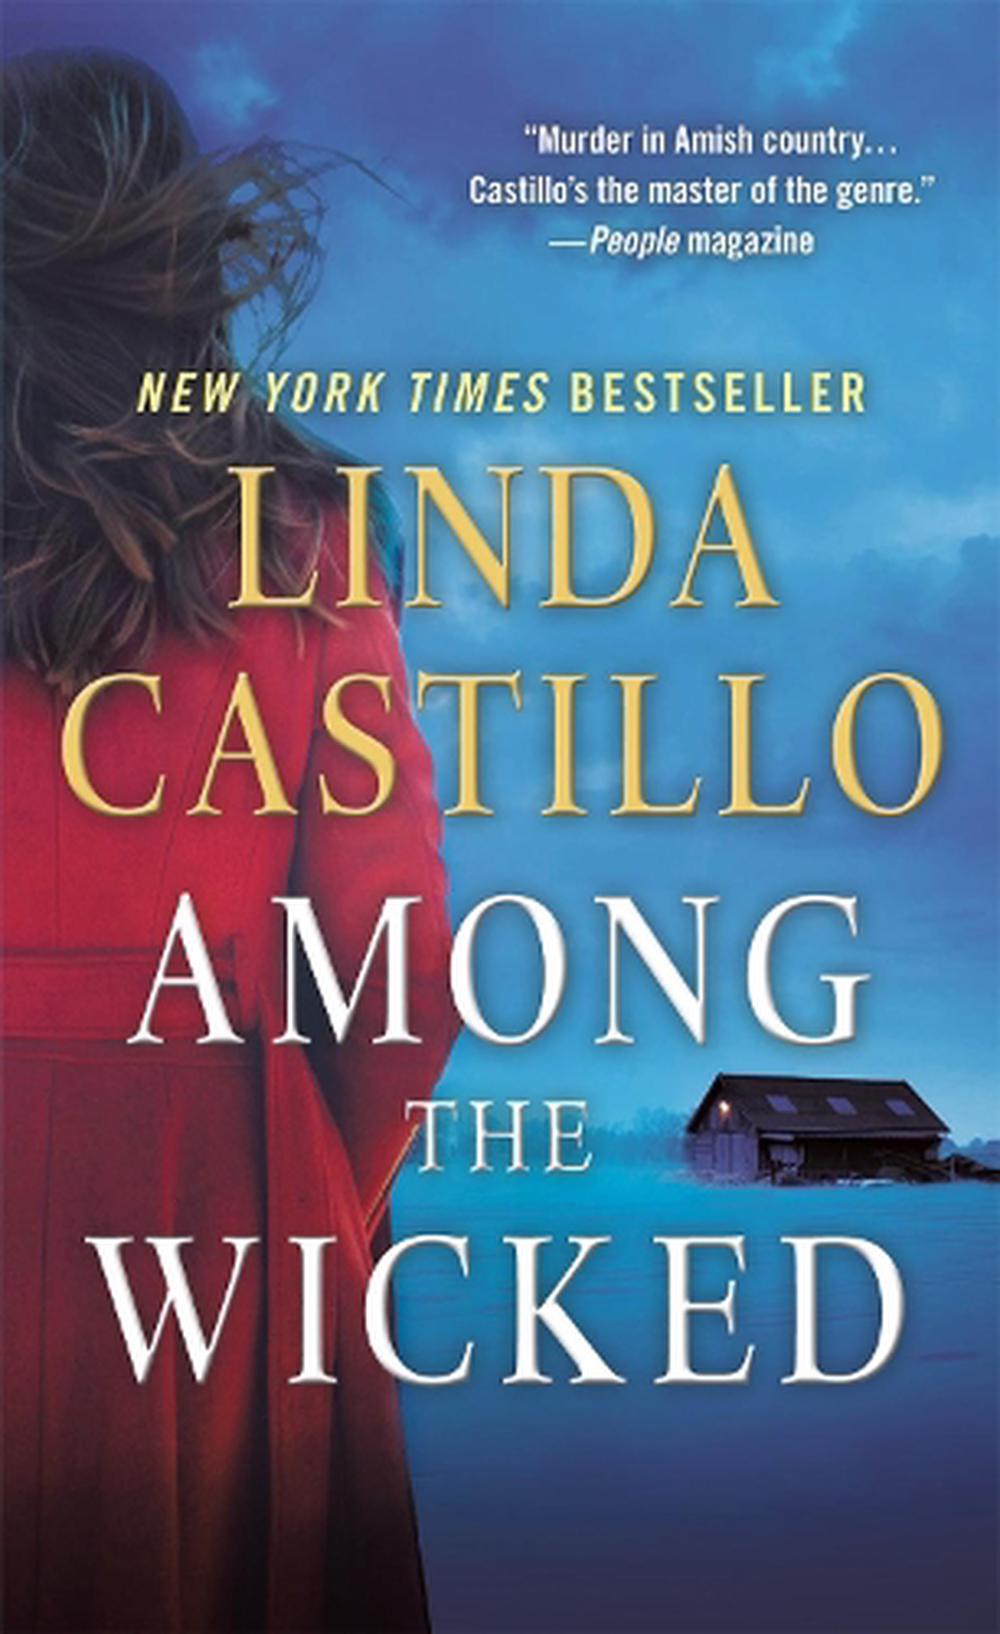 Among the Wicked by Linda Castillo Paperback Book Free Shipping